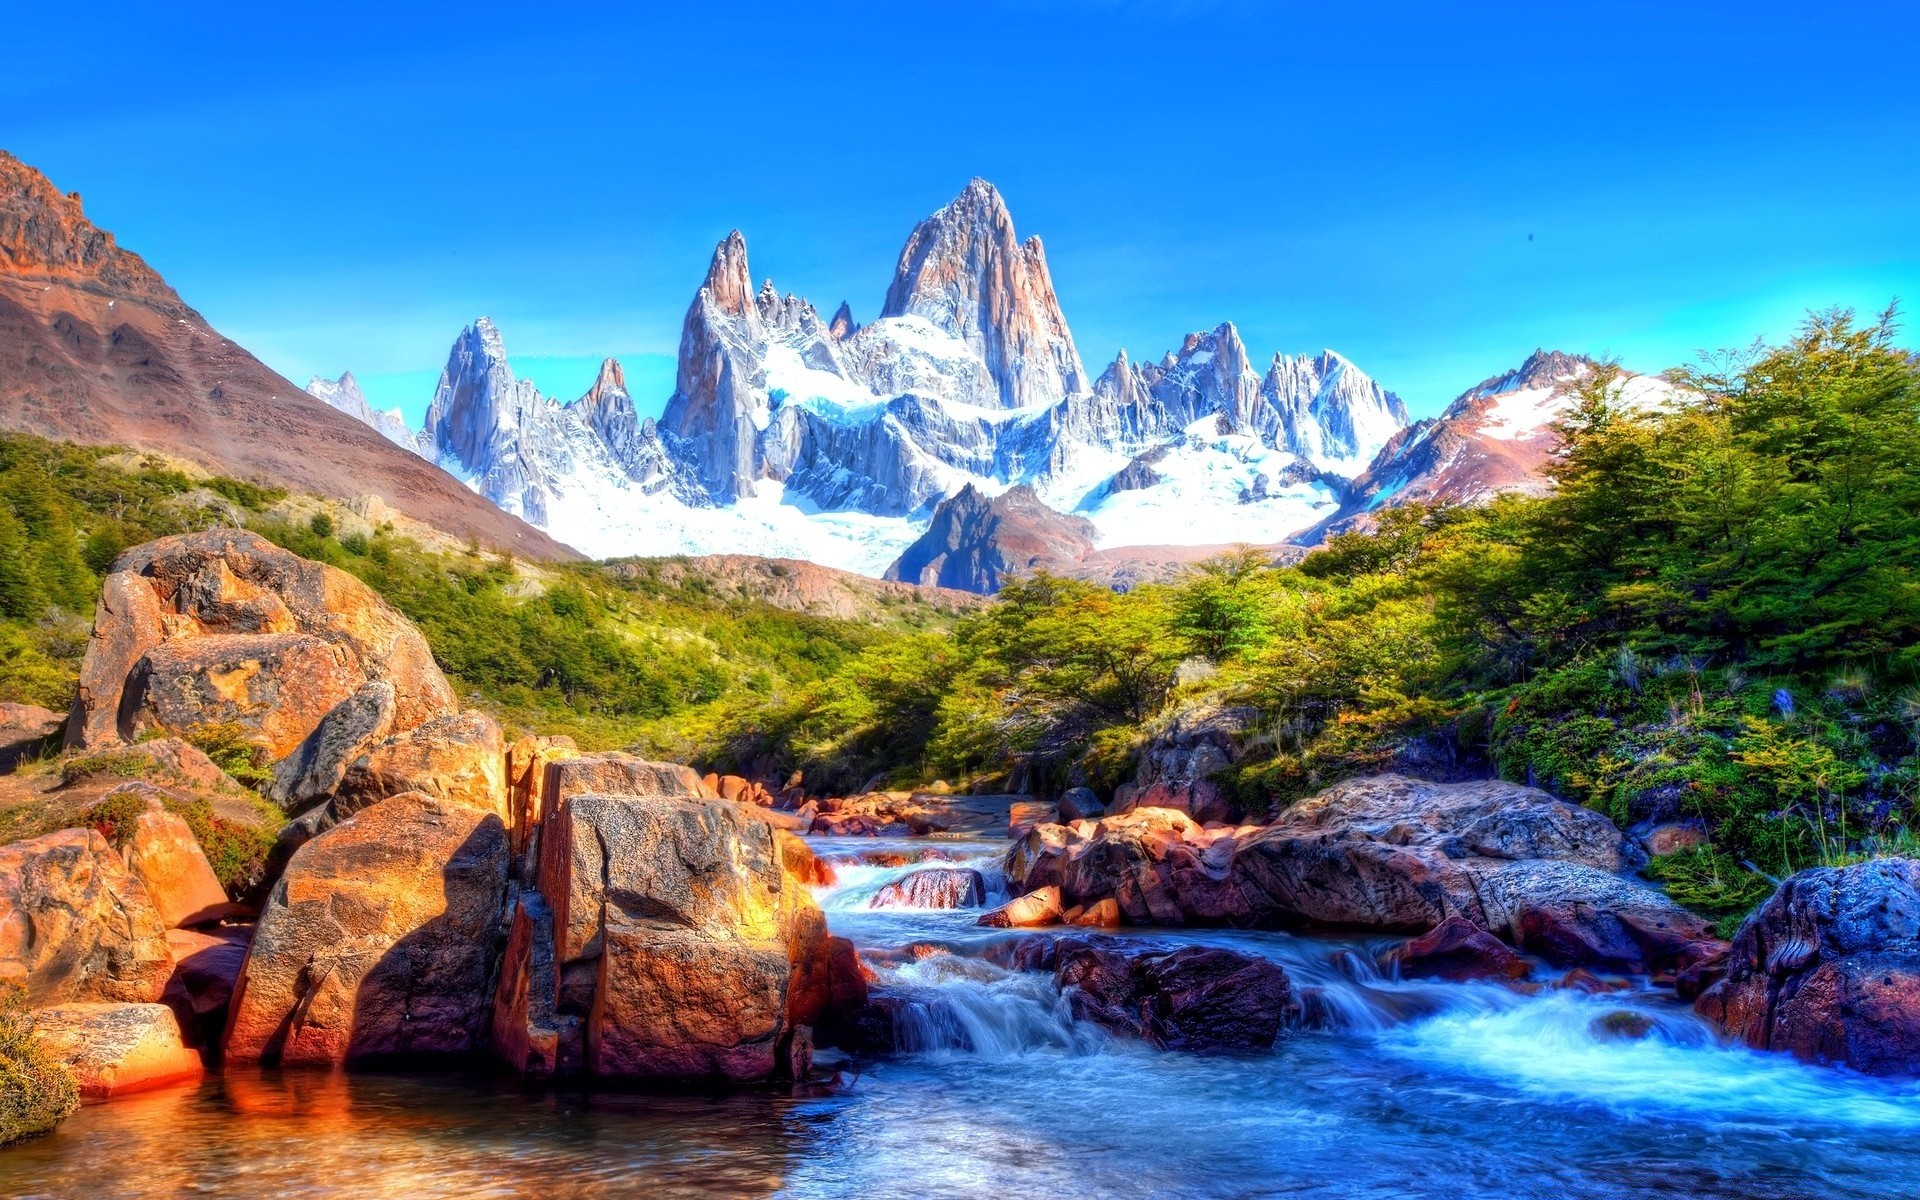 landscapes water mountain travel landscape nature rock scenic outdoors sky scenery tourism river lake